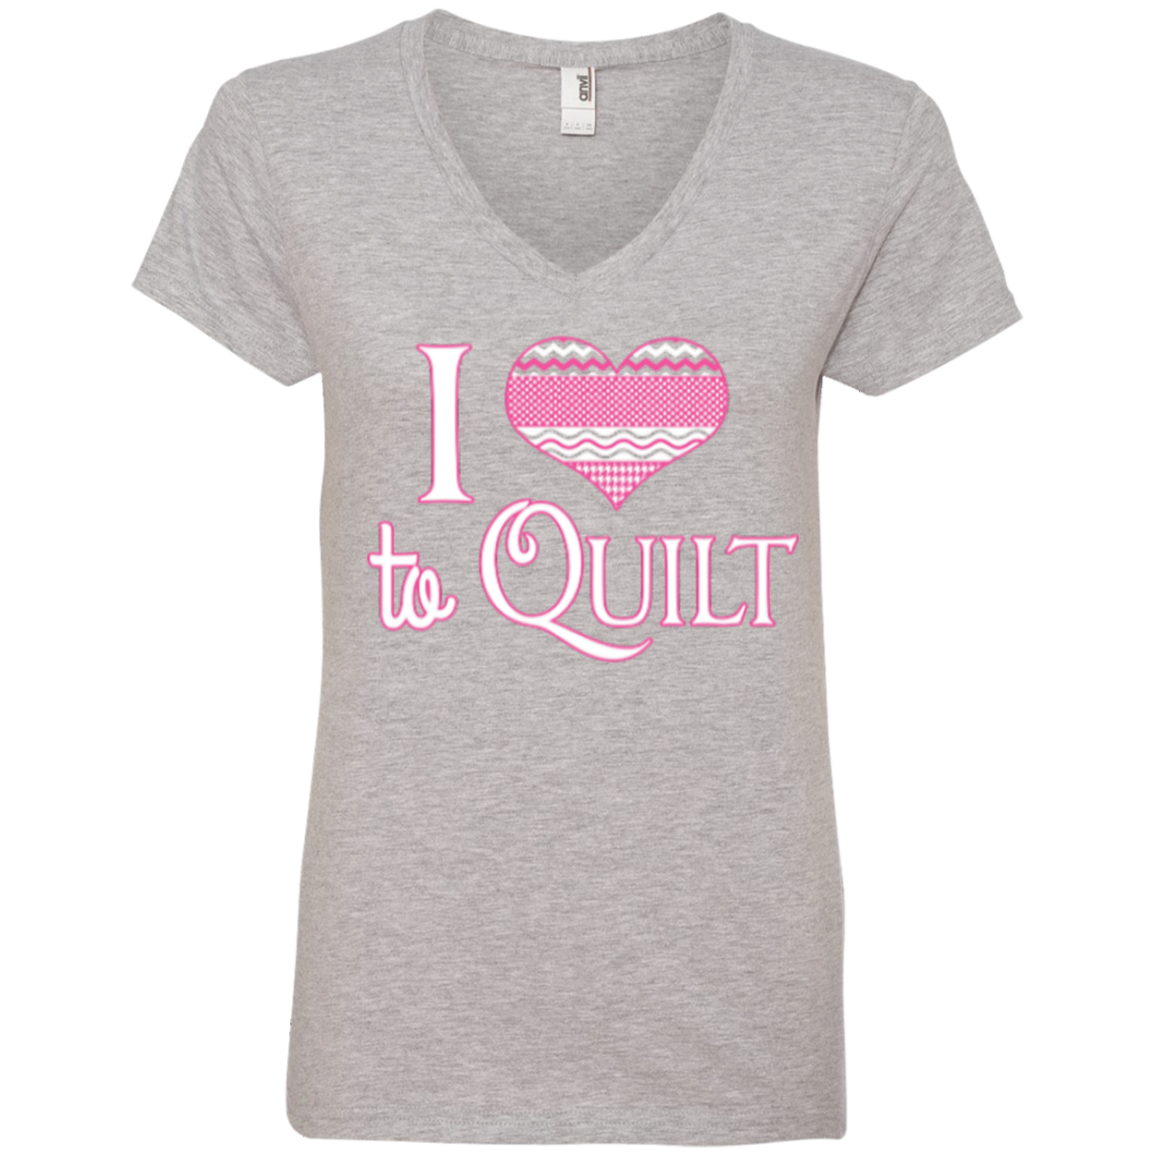 I Heart to Quilt Ladies V-neck Tee - Crafter4Life - 2